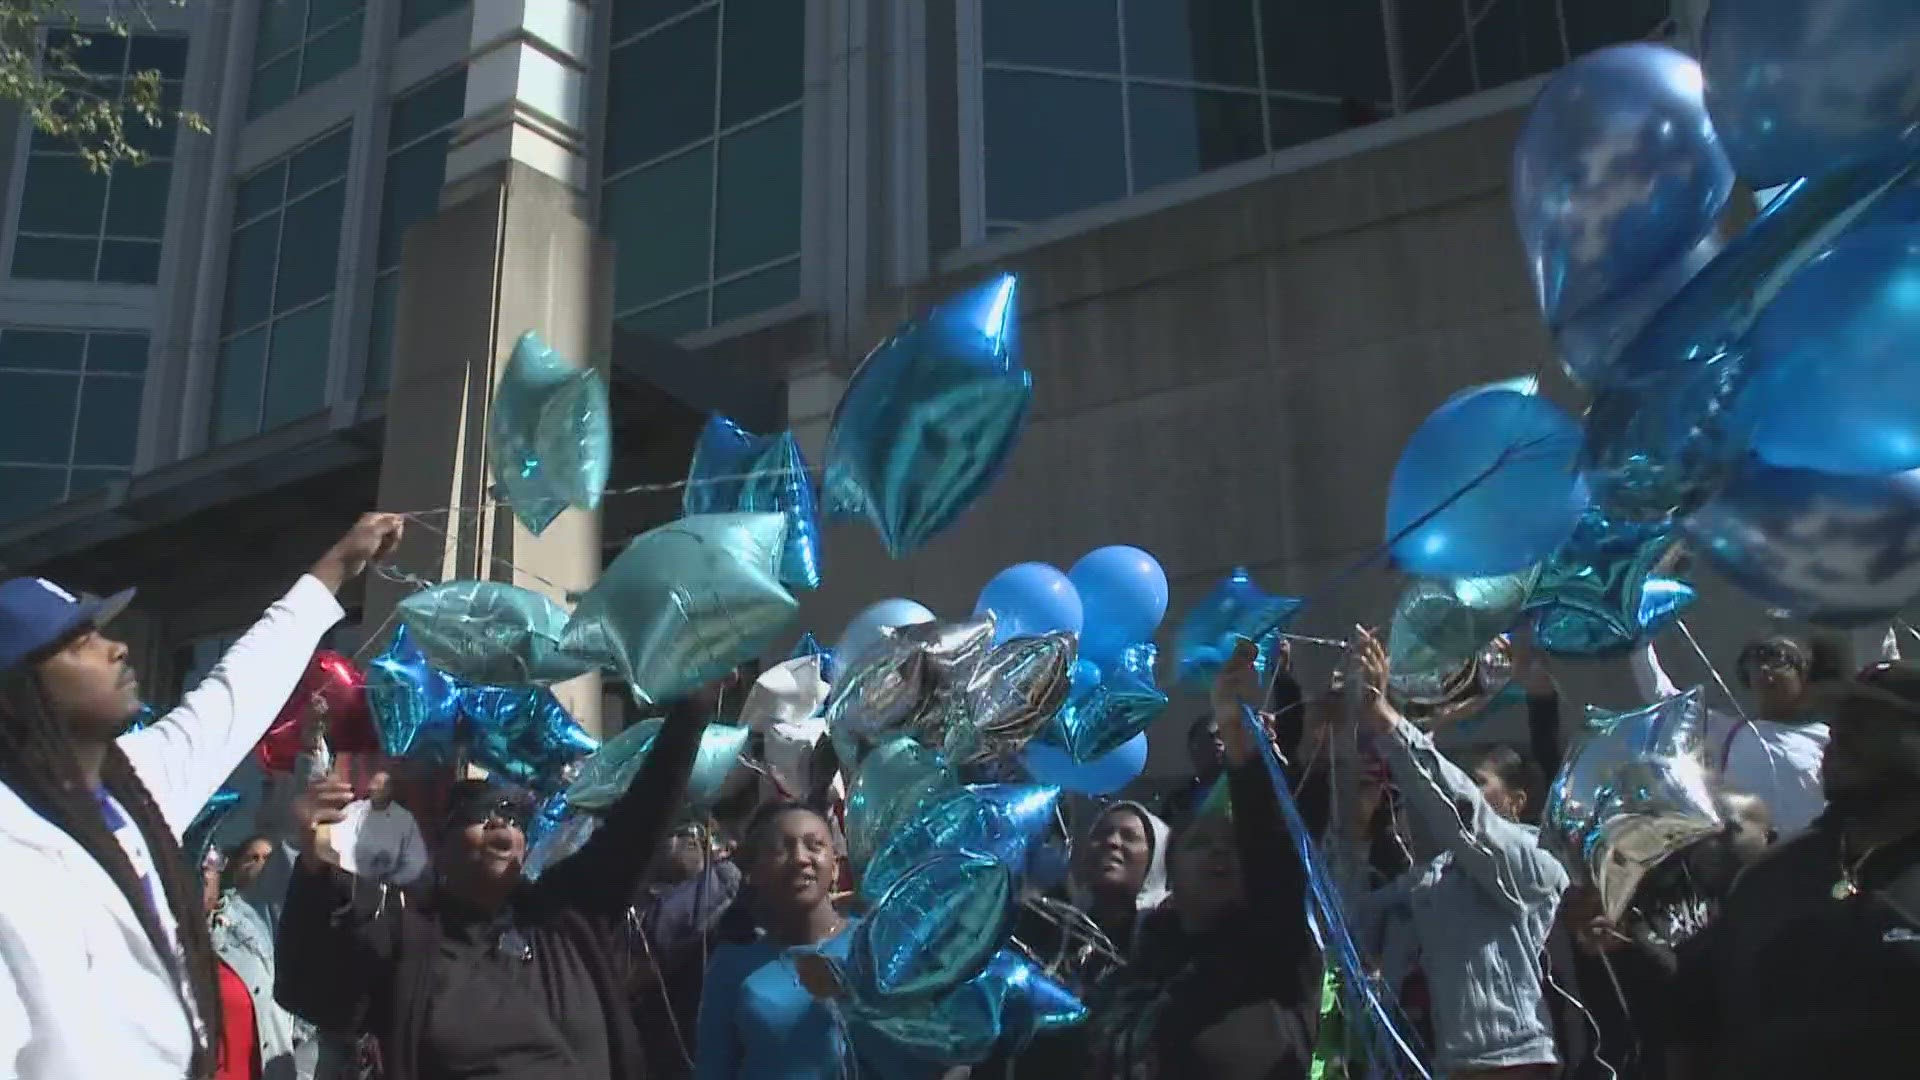 Friends and family of Juwon Carter held a balloon release outside of the City Justice Center on Saturday. Carter suffered a medical emergency while in custody.